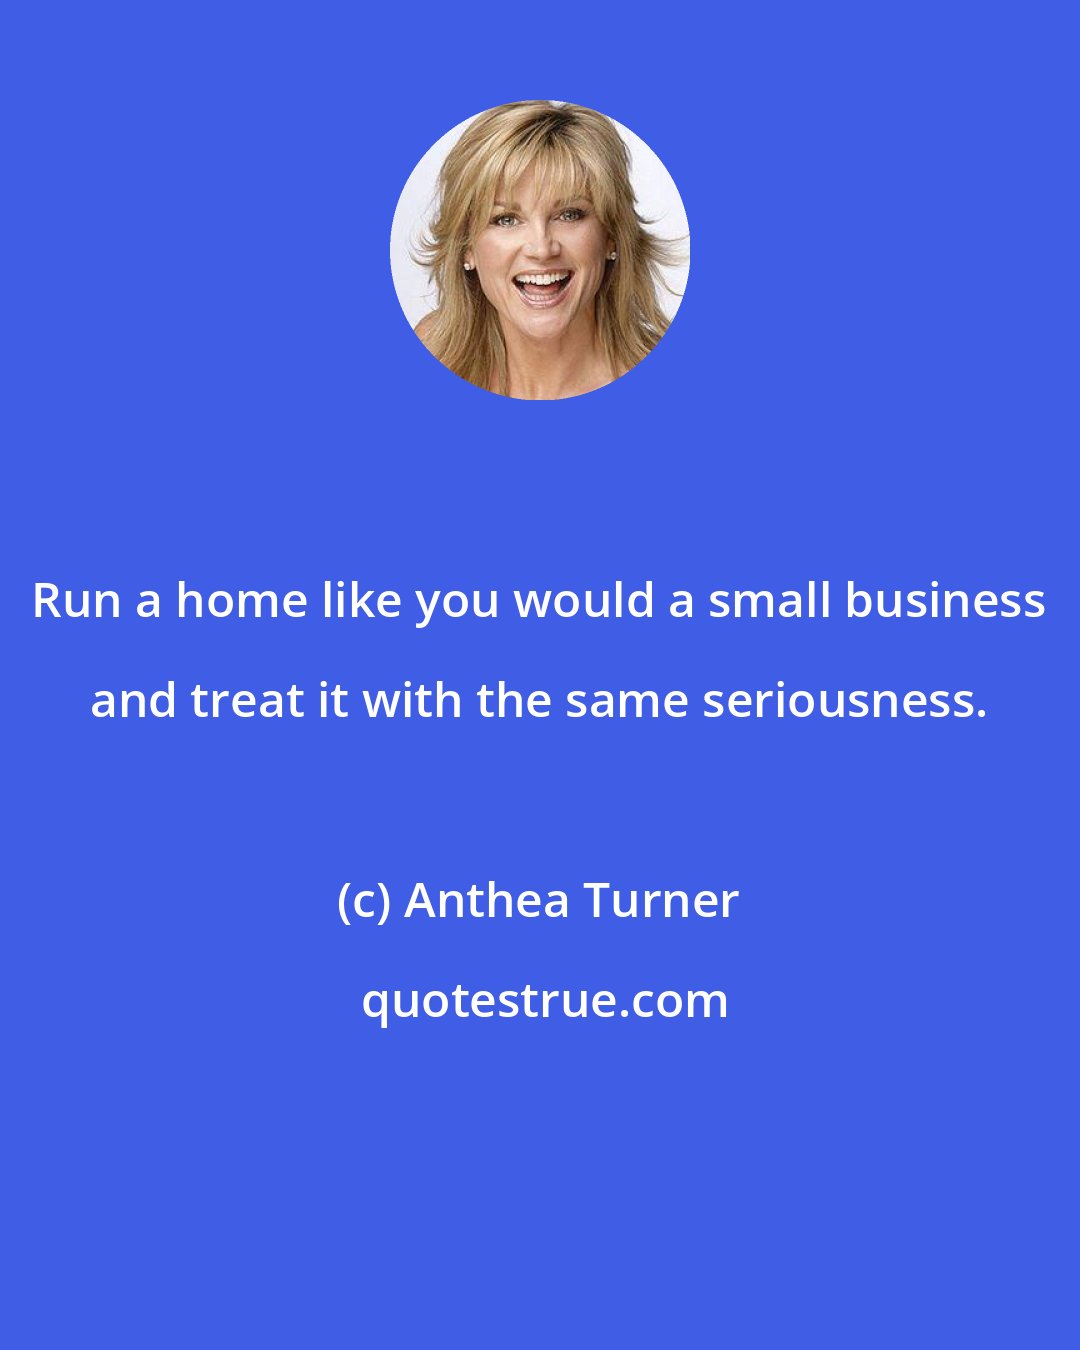 Anthea Turner: Run a home like you would a small business and treat it with the same seriousness.